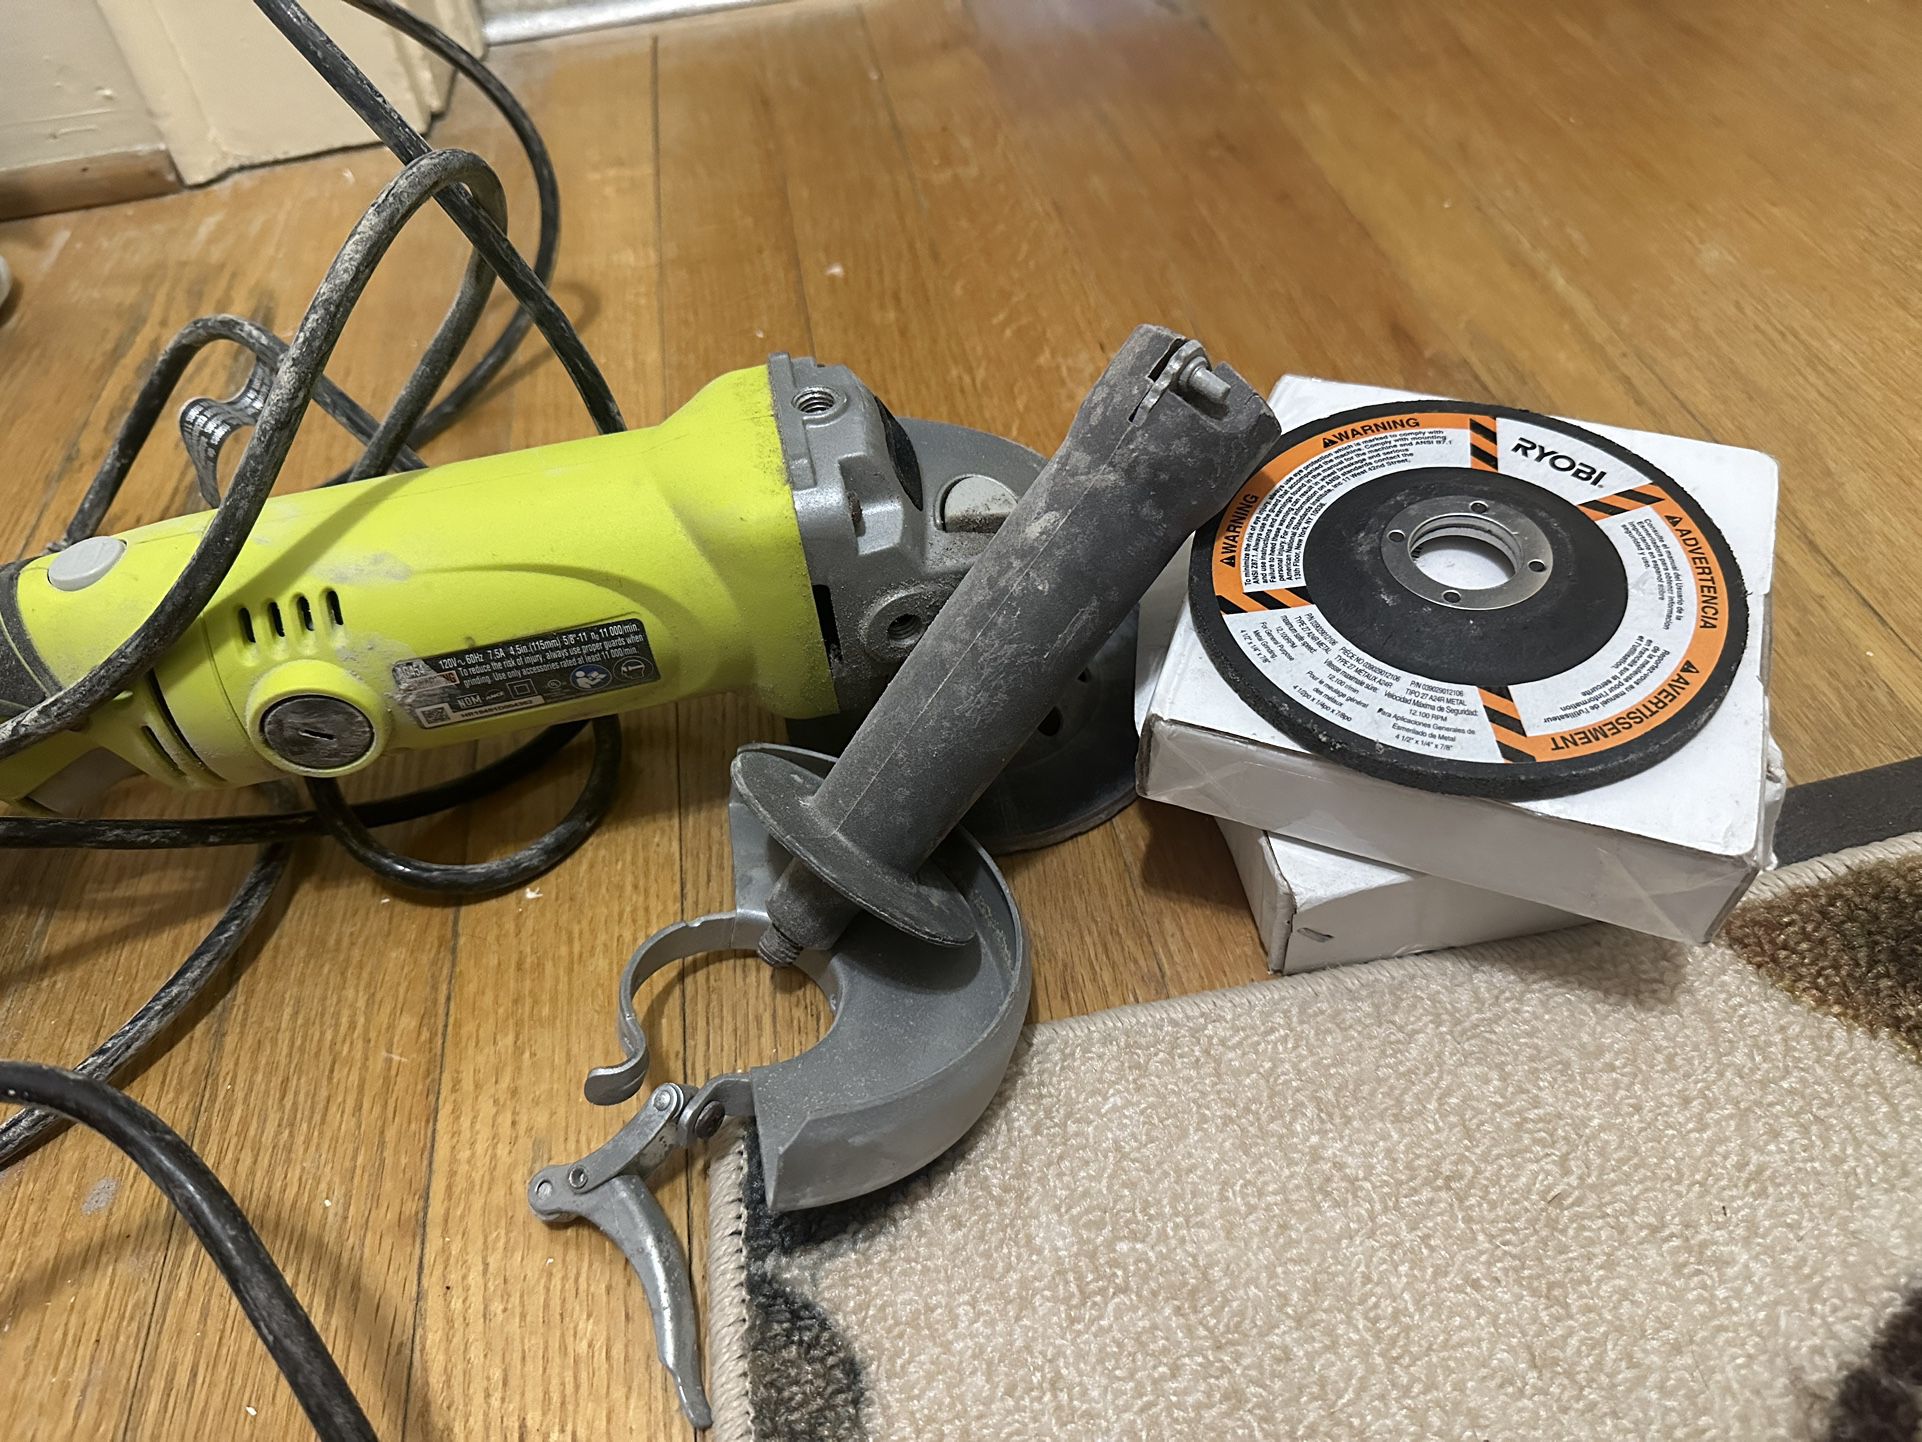 Ryobi Corded Grinder With Grinding Attachments 